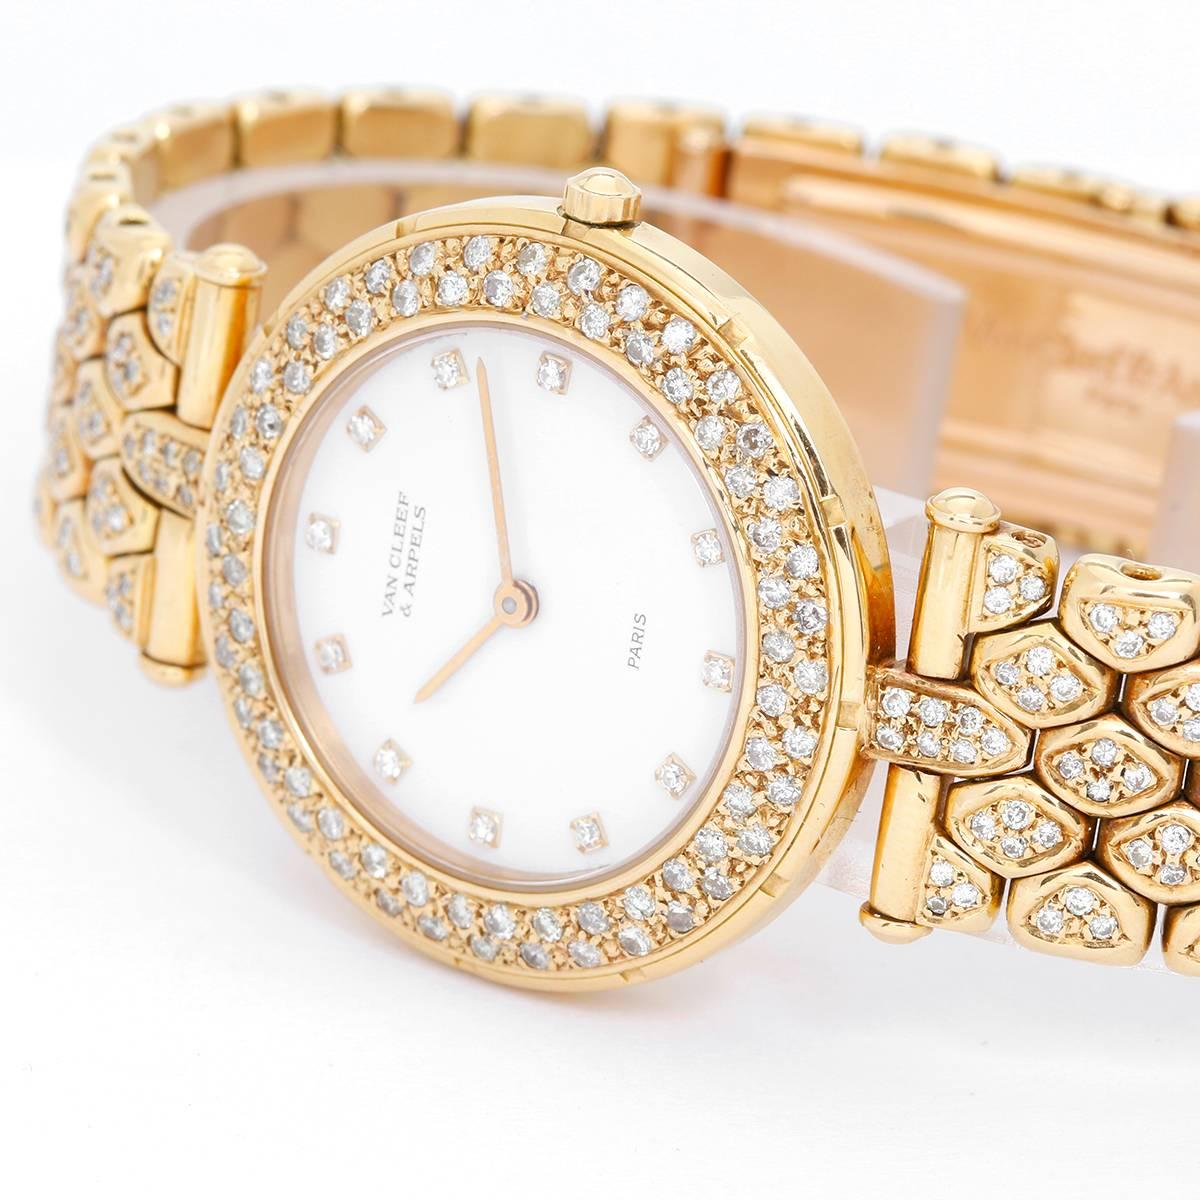 Van Cleef & Arpels Classique Paris Ladies Watch -  Quartz. 18K Yellow gold ( 31 mm ). White dial with diamond hour markers; two row diamond bezel. 18K Yellow gold diamond bracelet with double deployant buckle. Pre-owned with box.